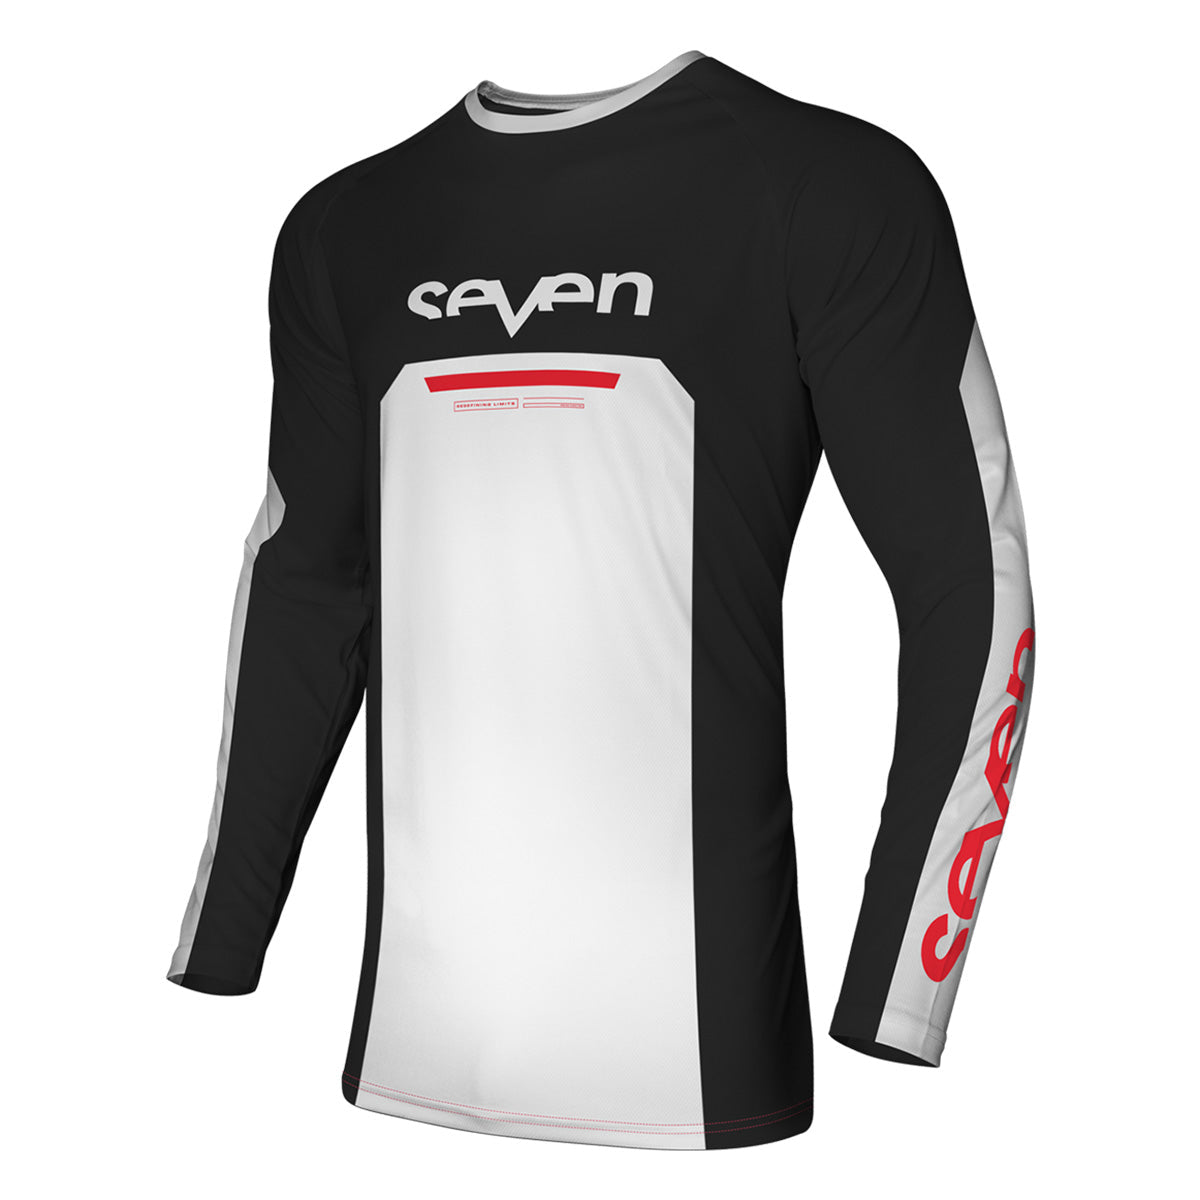 Maillot Seven Youth Vox Phaser